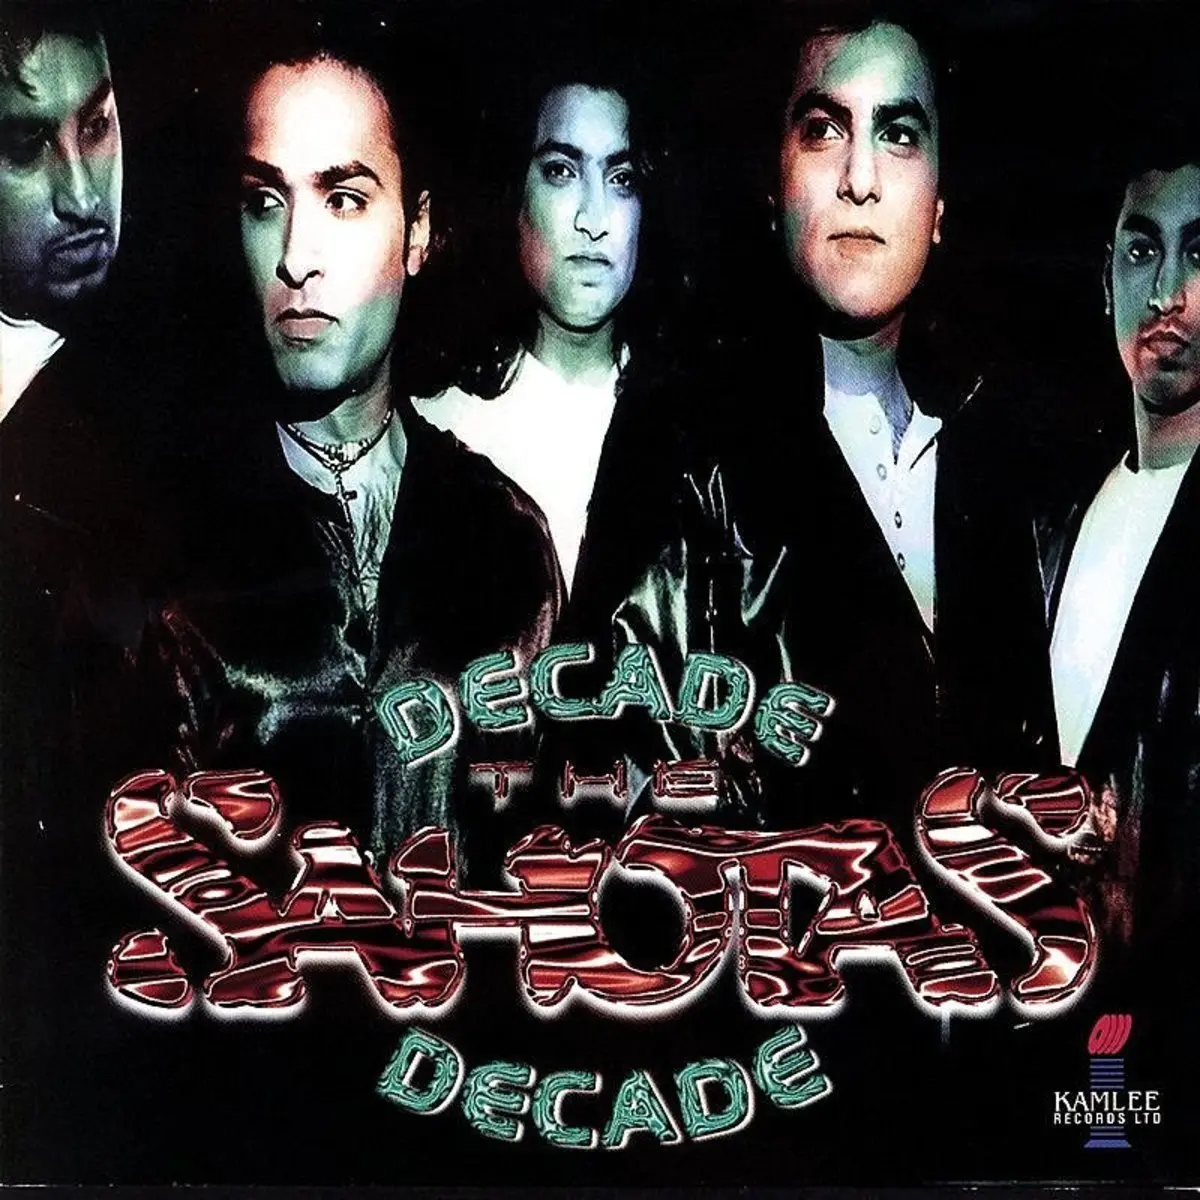 Sach Mp3 Song Download Decade Sach Song By Sahotas On Gaana Com Download your favorite mp3 songs, artists, remix on the. gaana